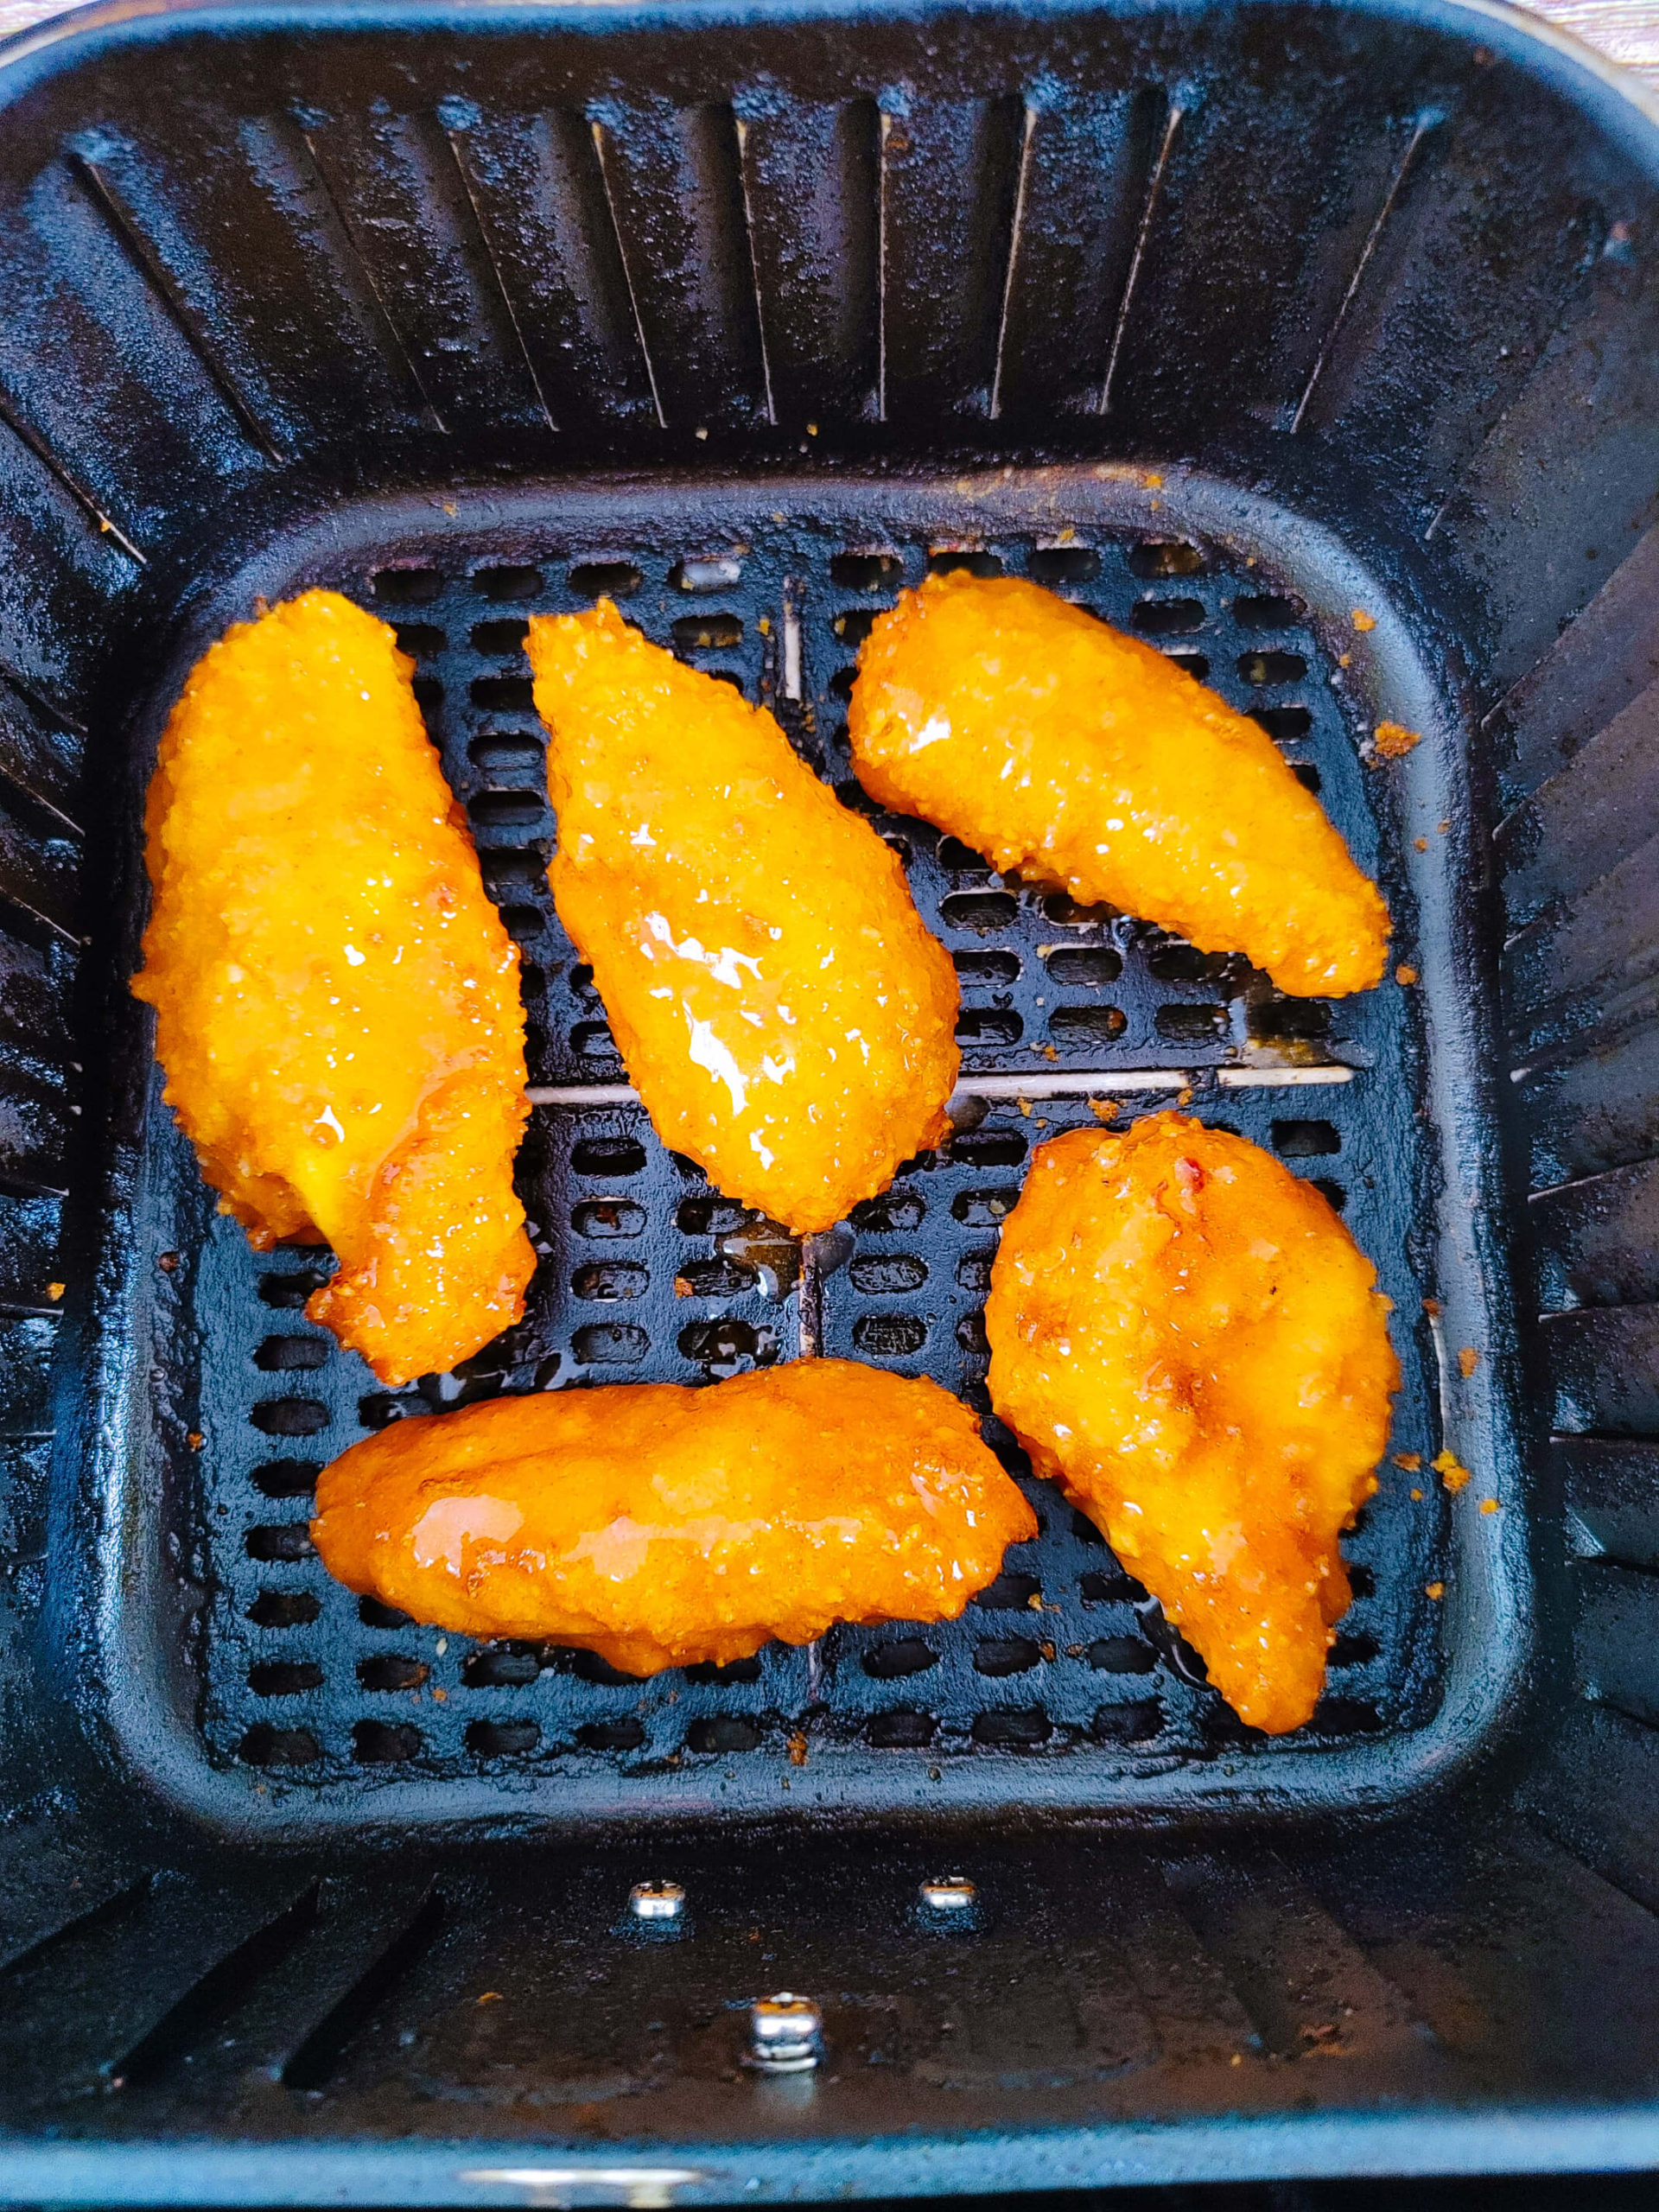 DIP TENDERS IN BUFFALO SAUCE AND CONTINUE TO AIR FRY